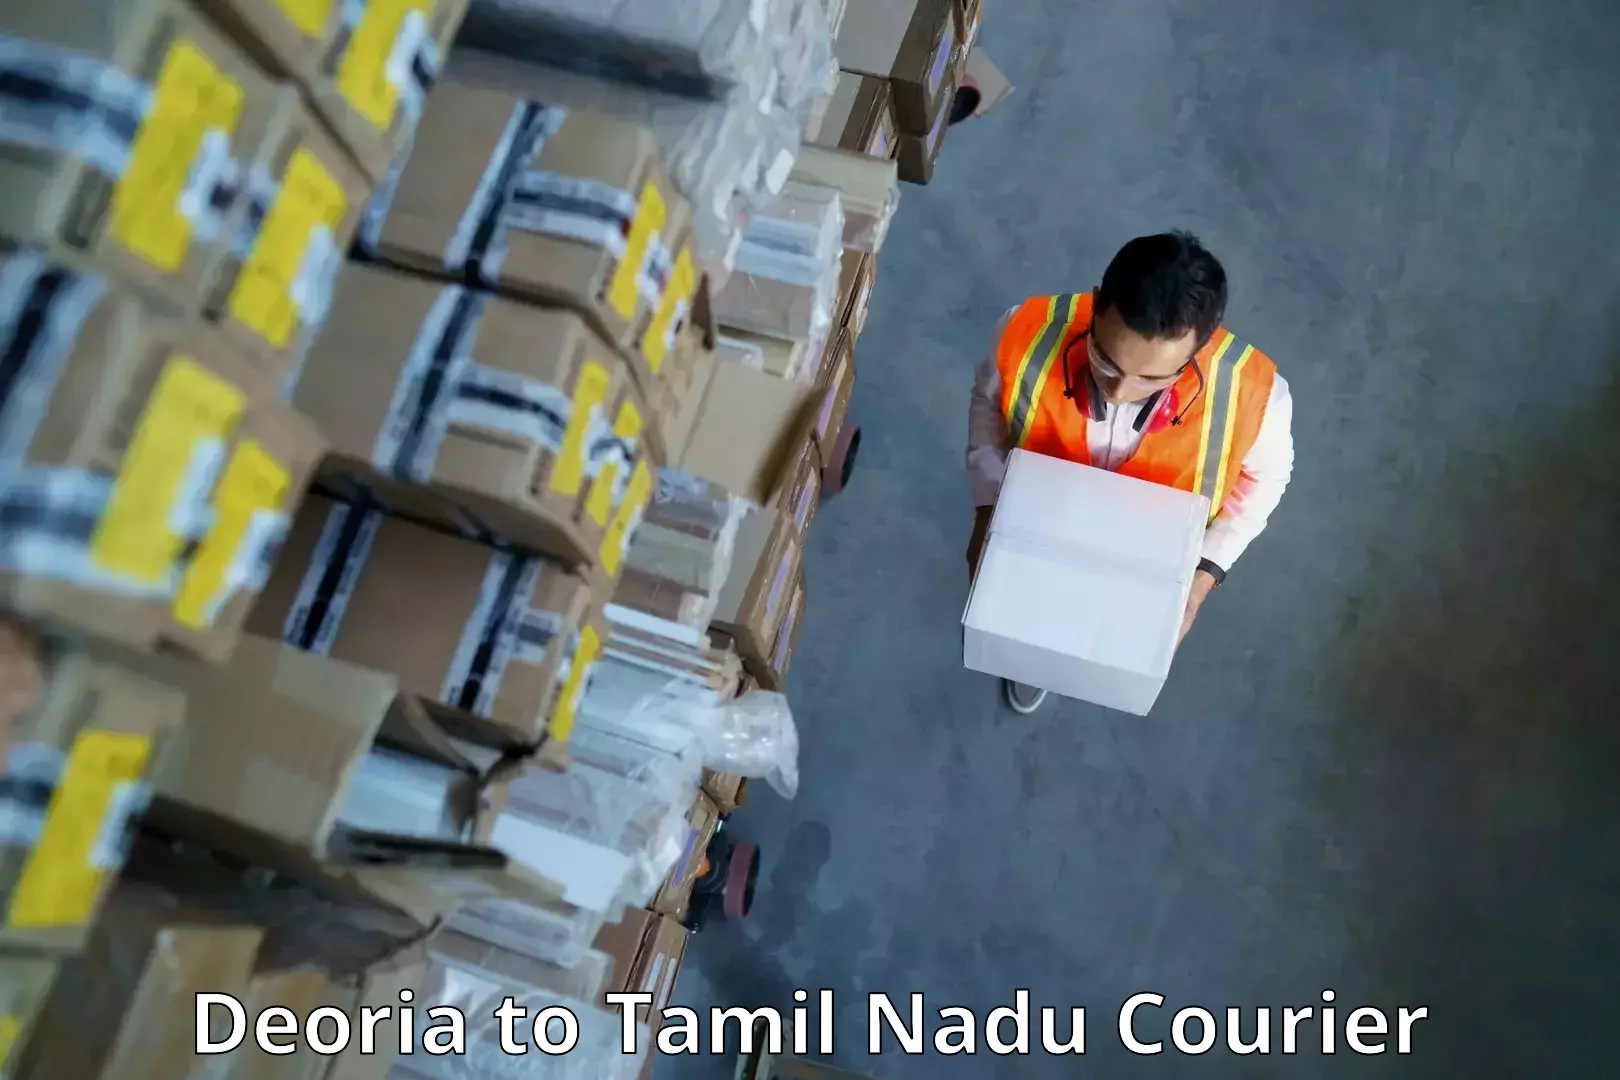 Courier service booking Deoria to Vellore